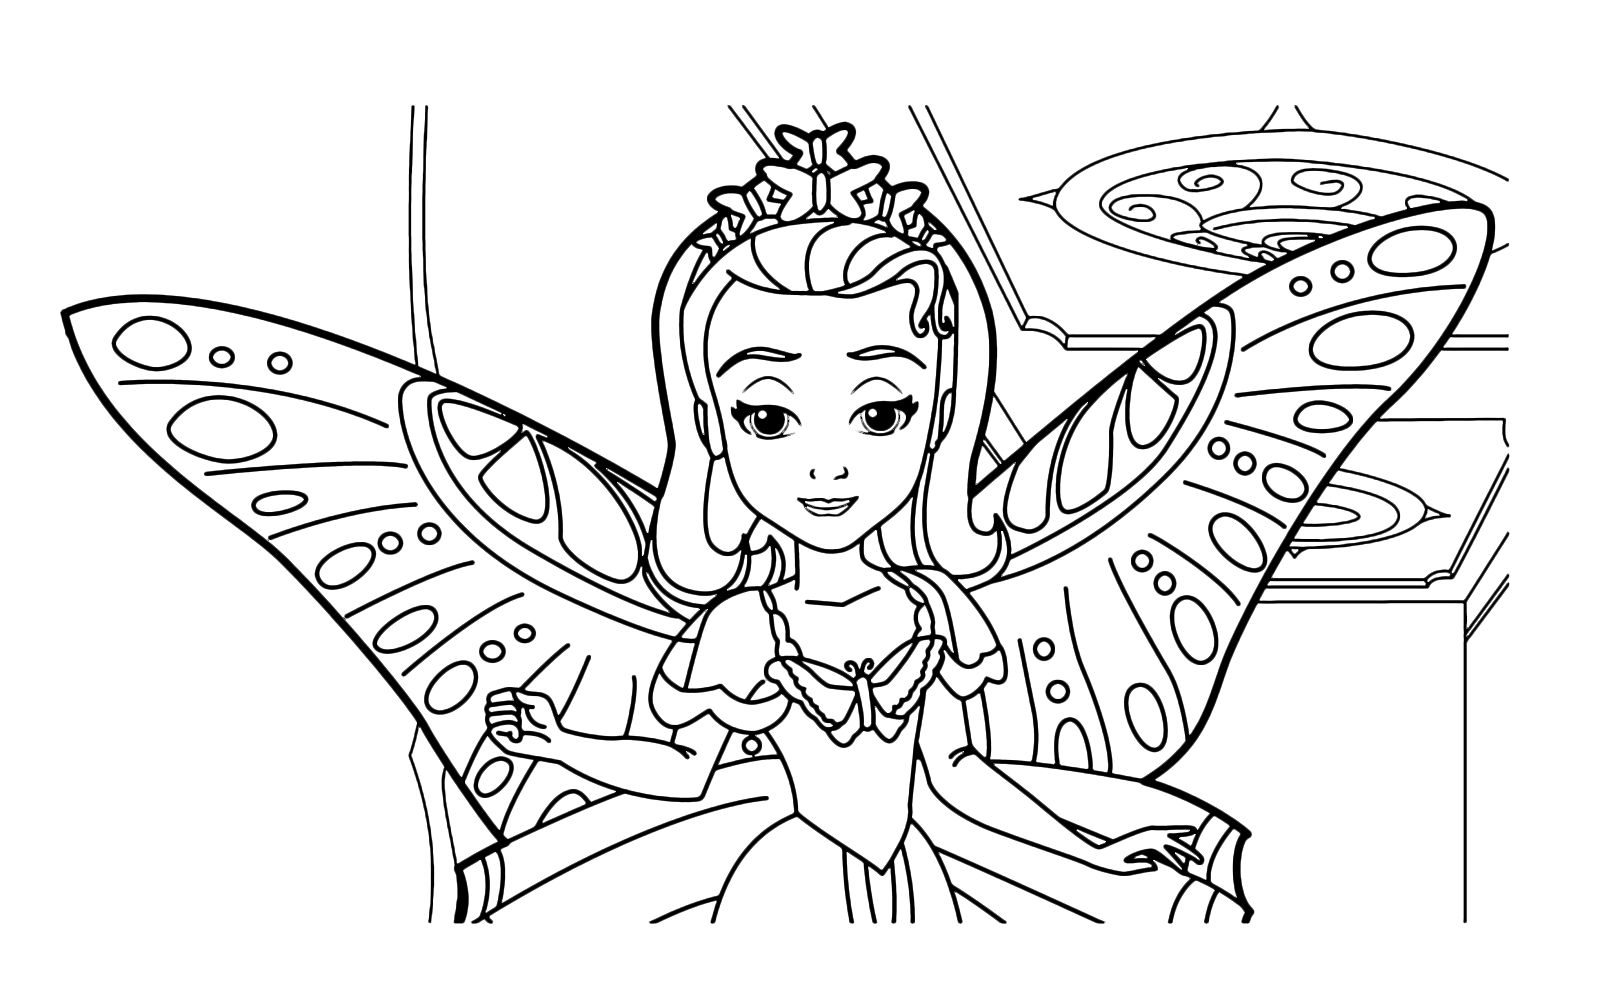 coloring book ~ Sofia Princess Coloring Stunning The First Amber With  Butterfly Wings Book Disney Stunning Sofia Princess Coloring. Sofia  Princess Coloring Sheets Free. Sofia Princess Coloring Pages To Print.  Sofia The